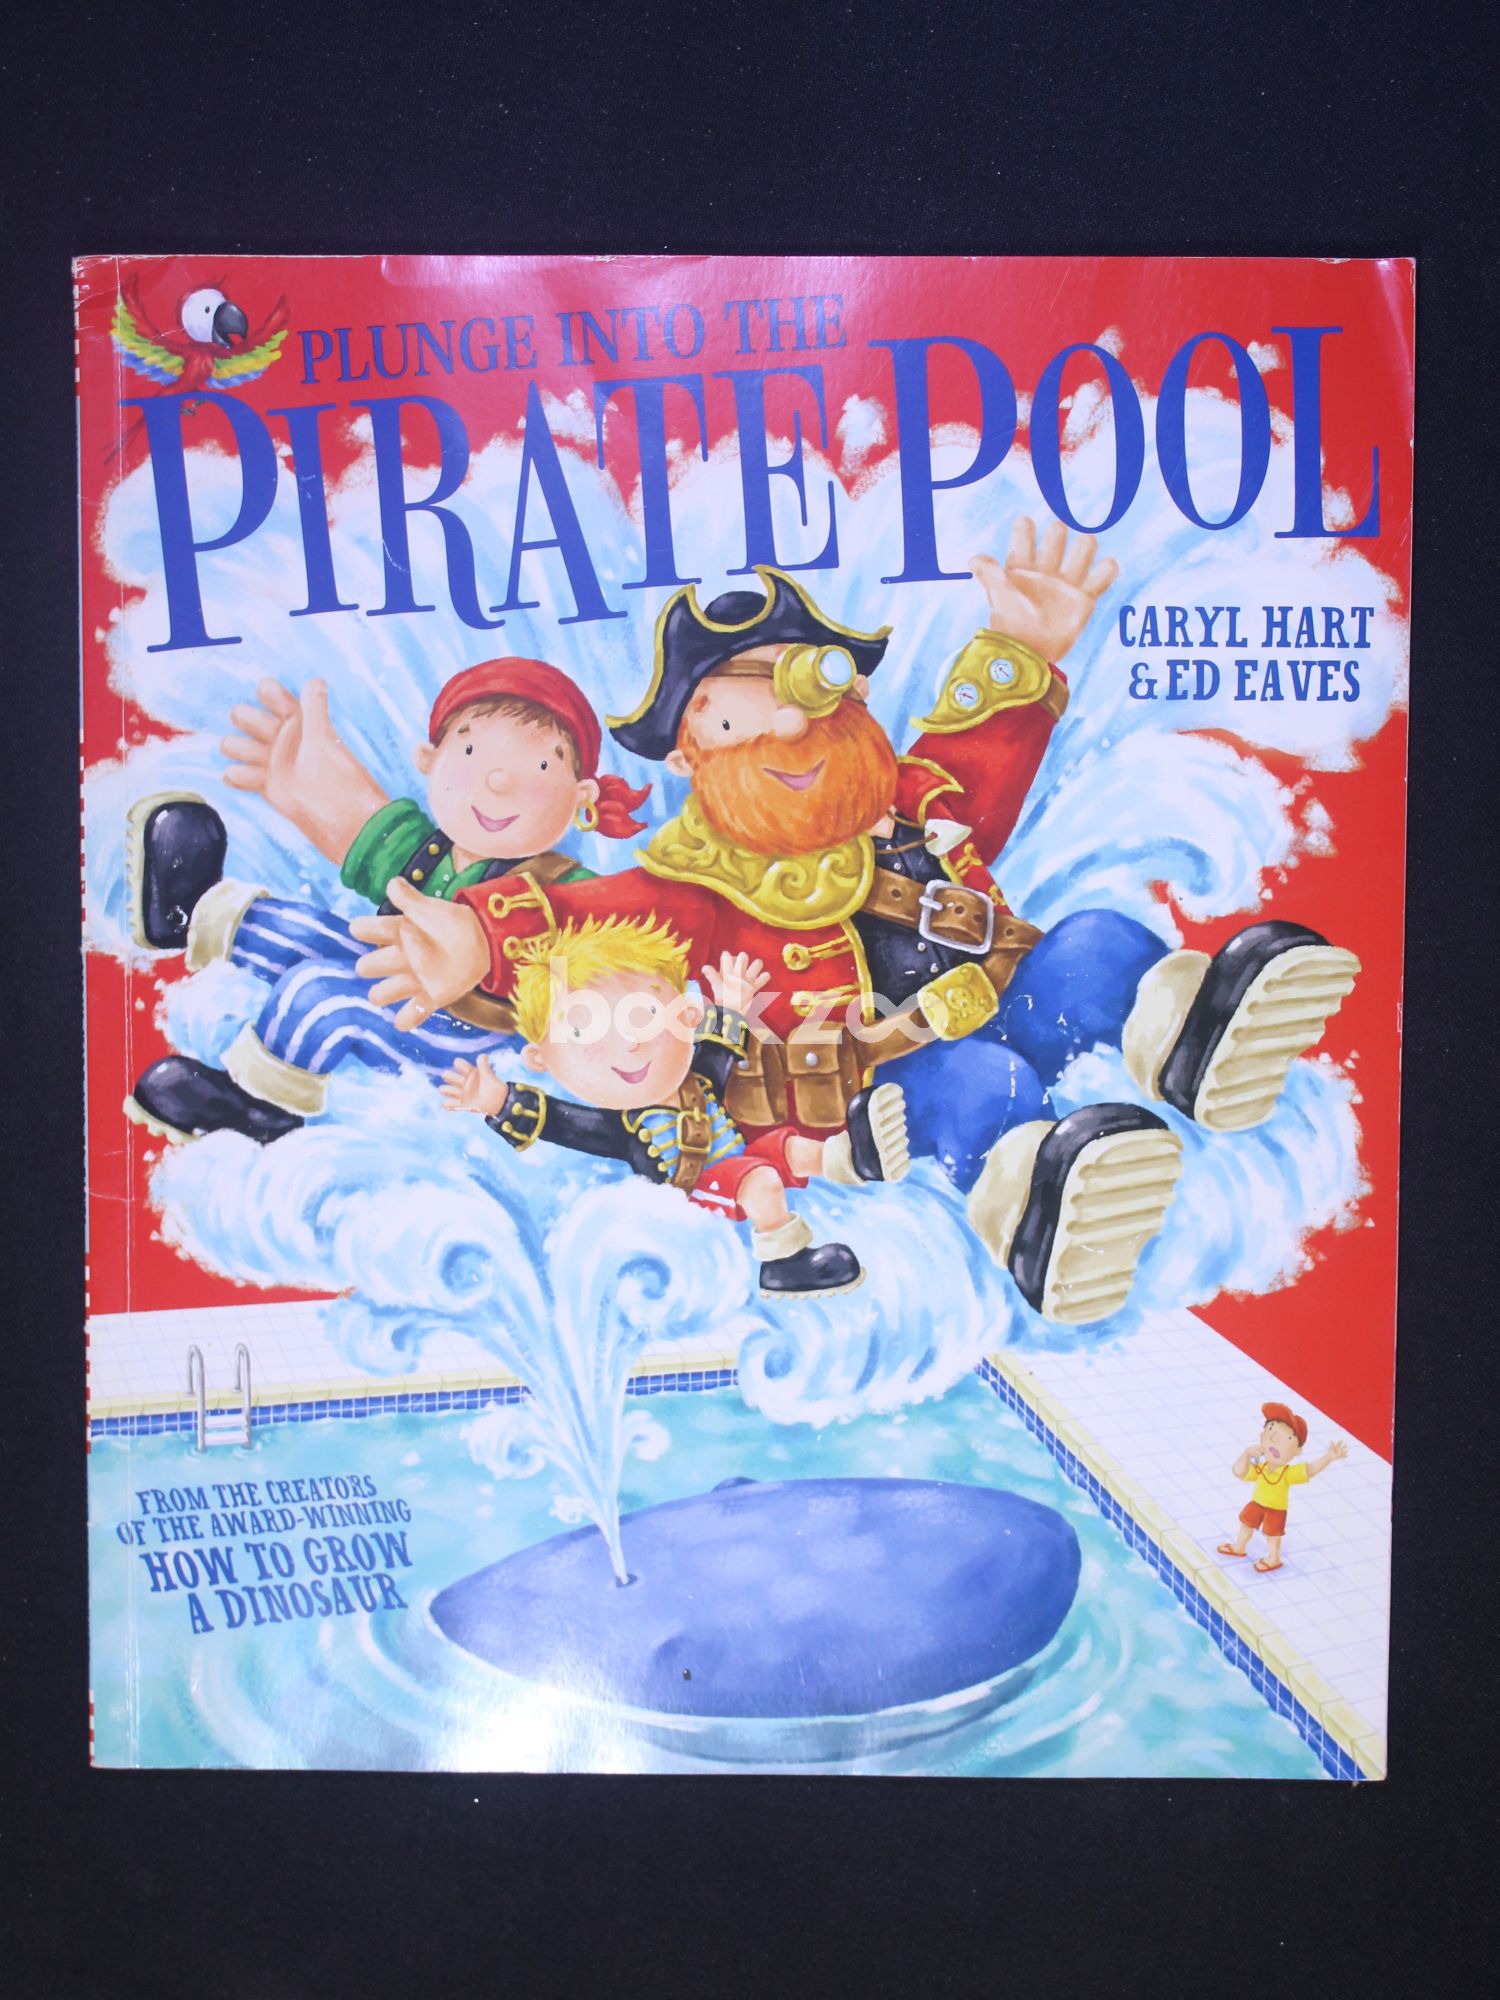 Simon & Schuster Plunge Into The Pirate Pool : Caryl Hart, Ed Eaves:  : Books